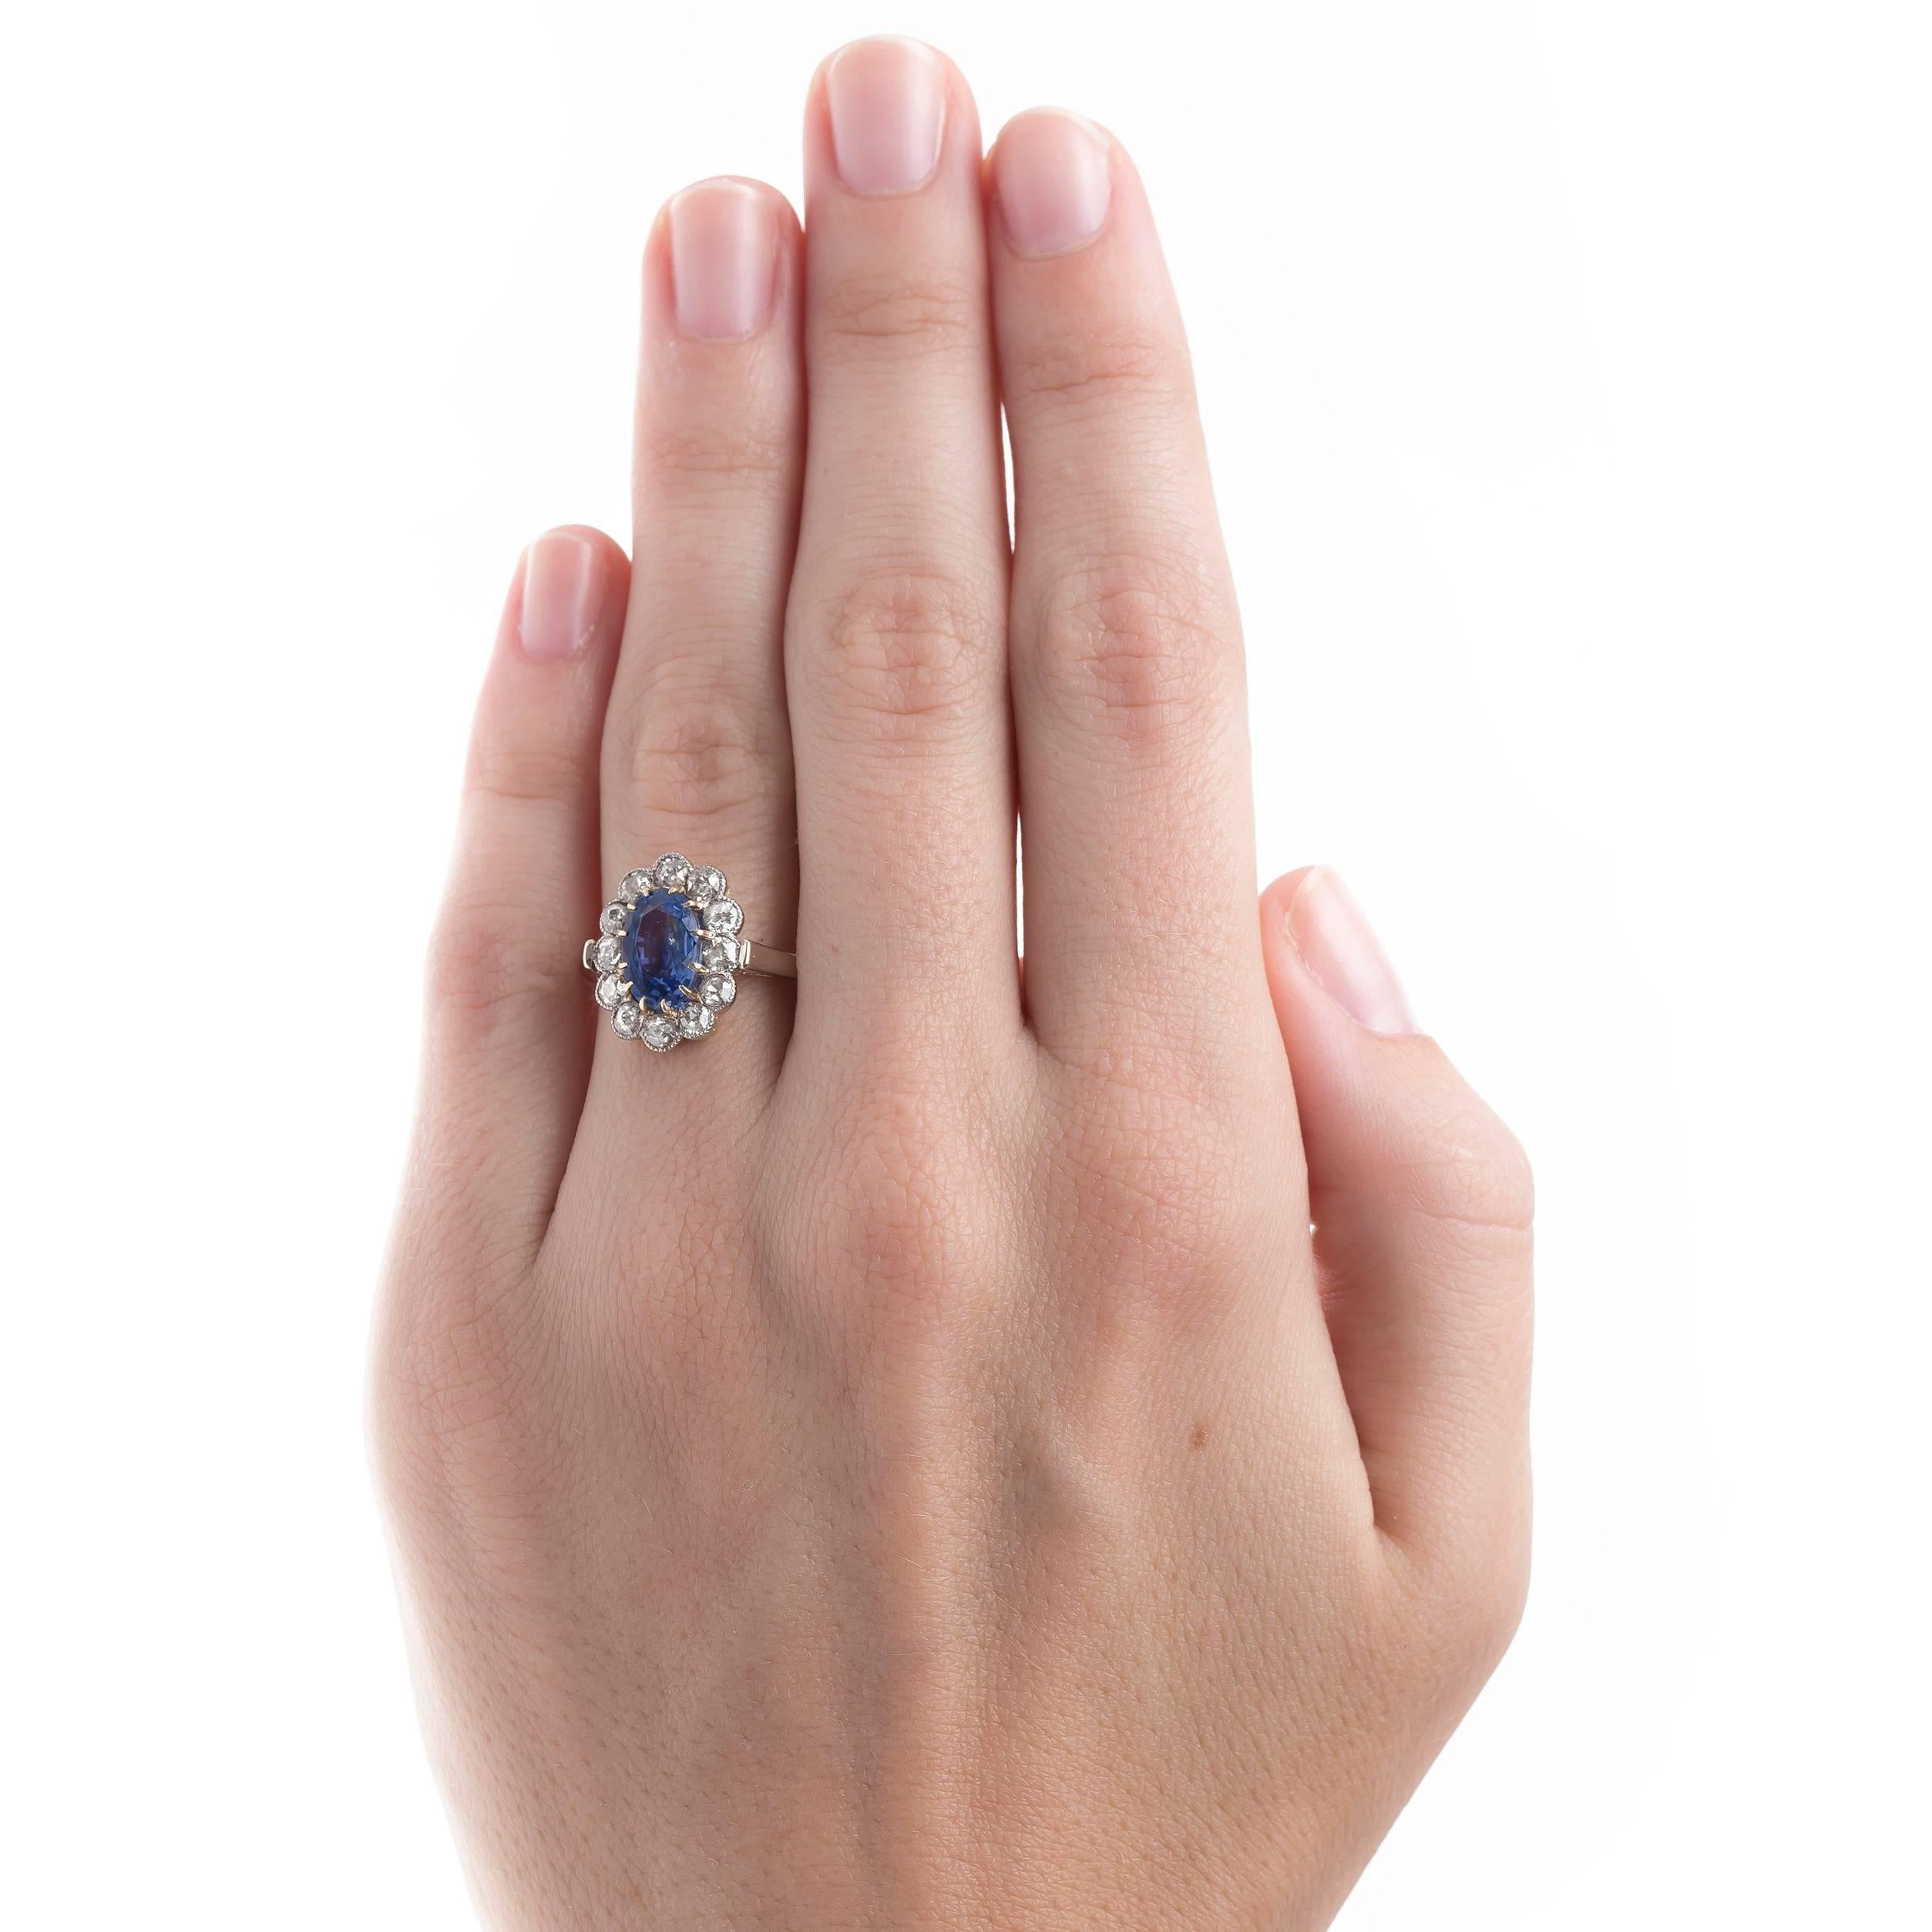 Late Victorian Exceptional Victorian Engagement Ring with Unheated Sapphire and Diamond Halo